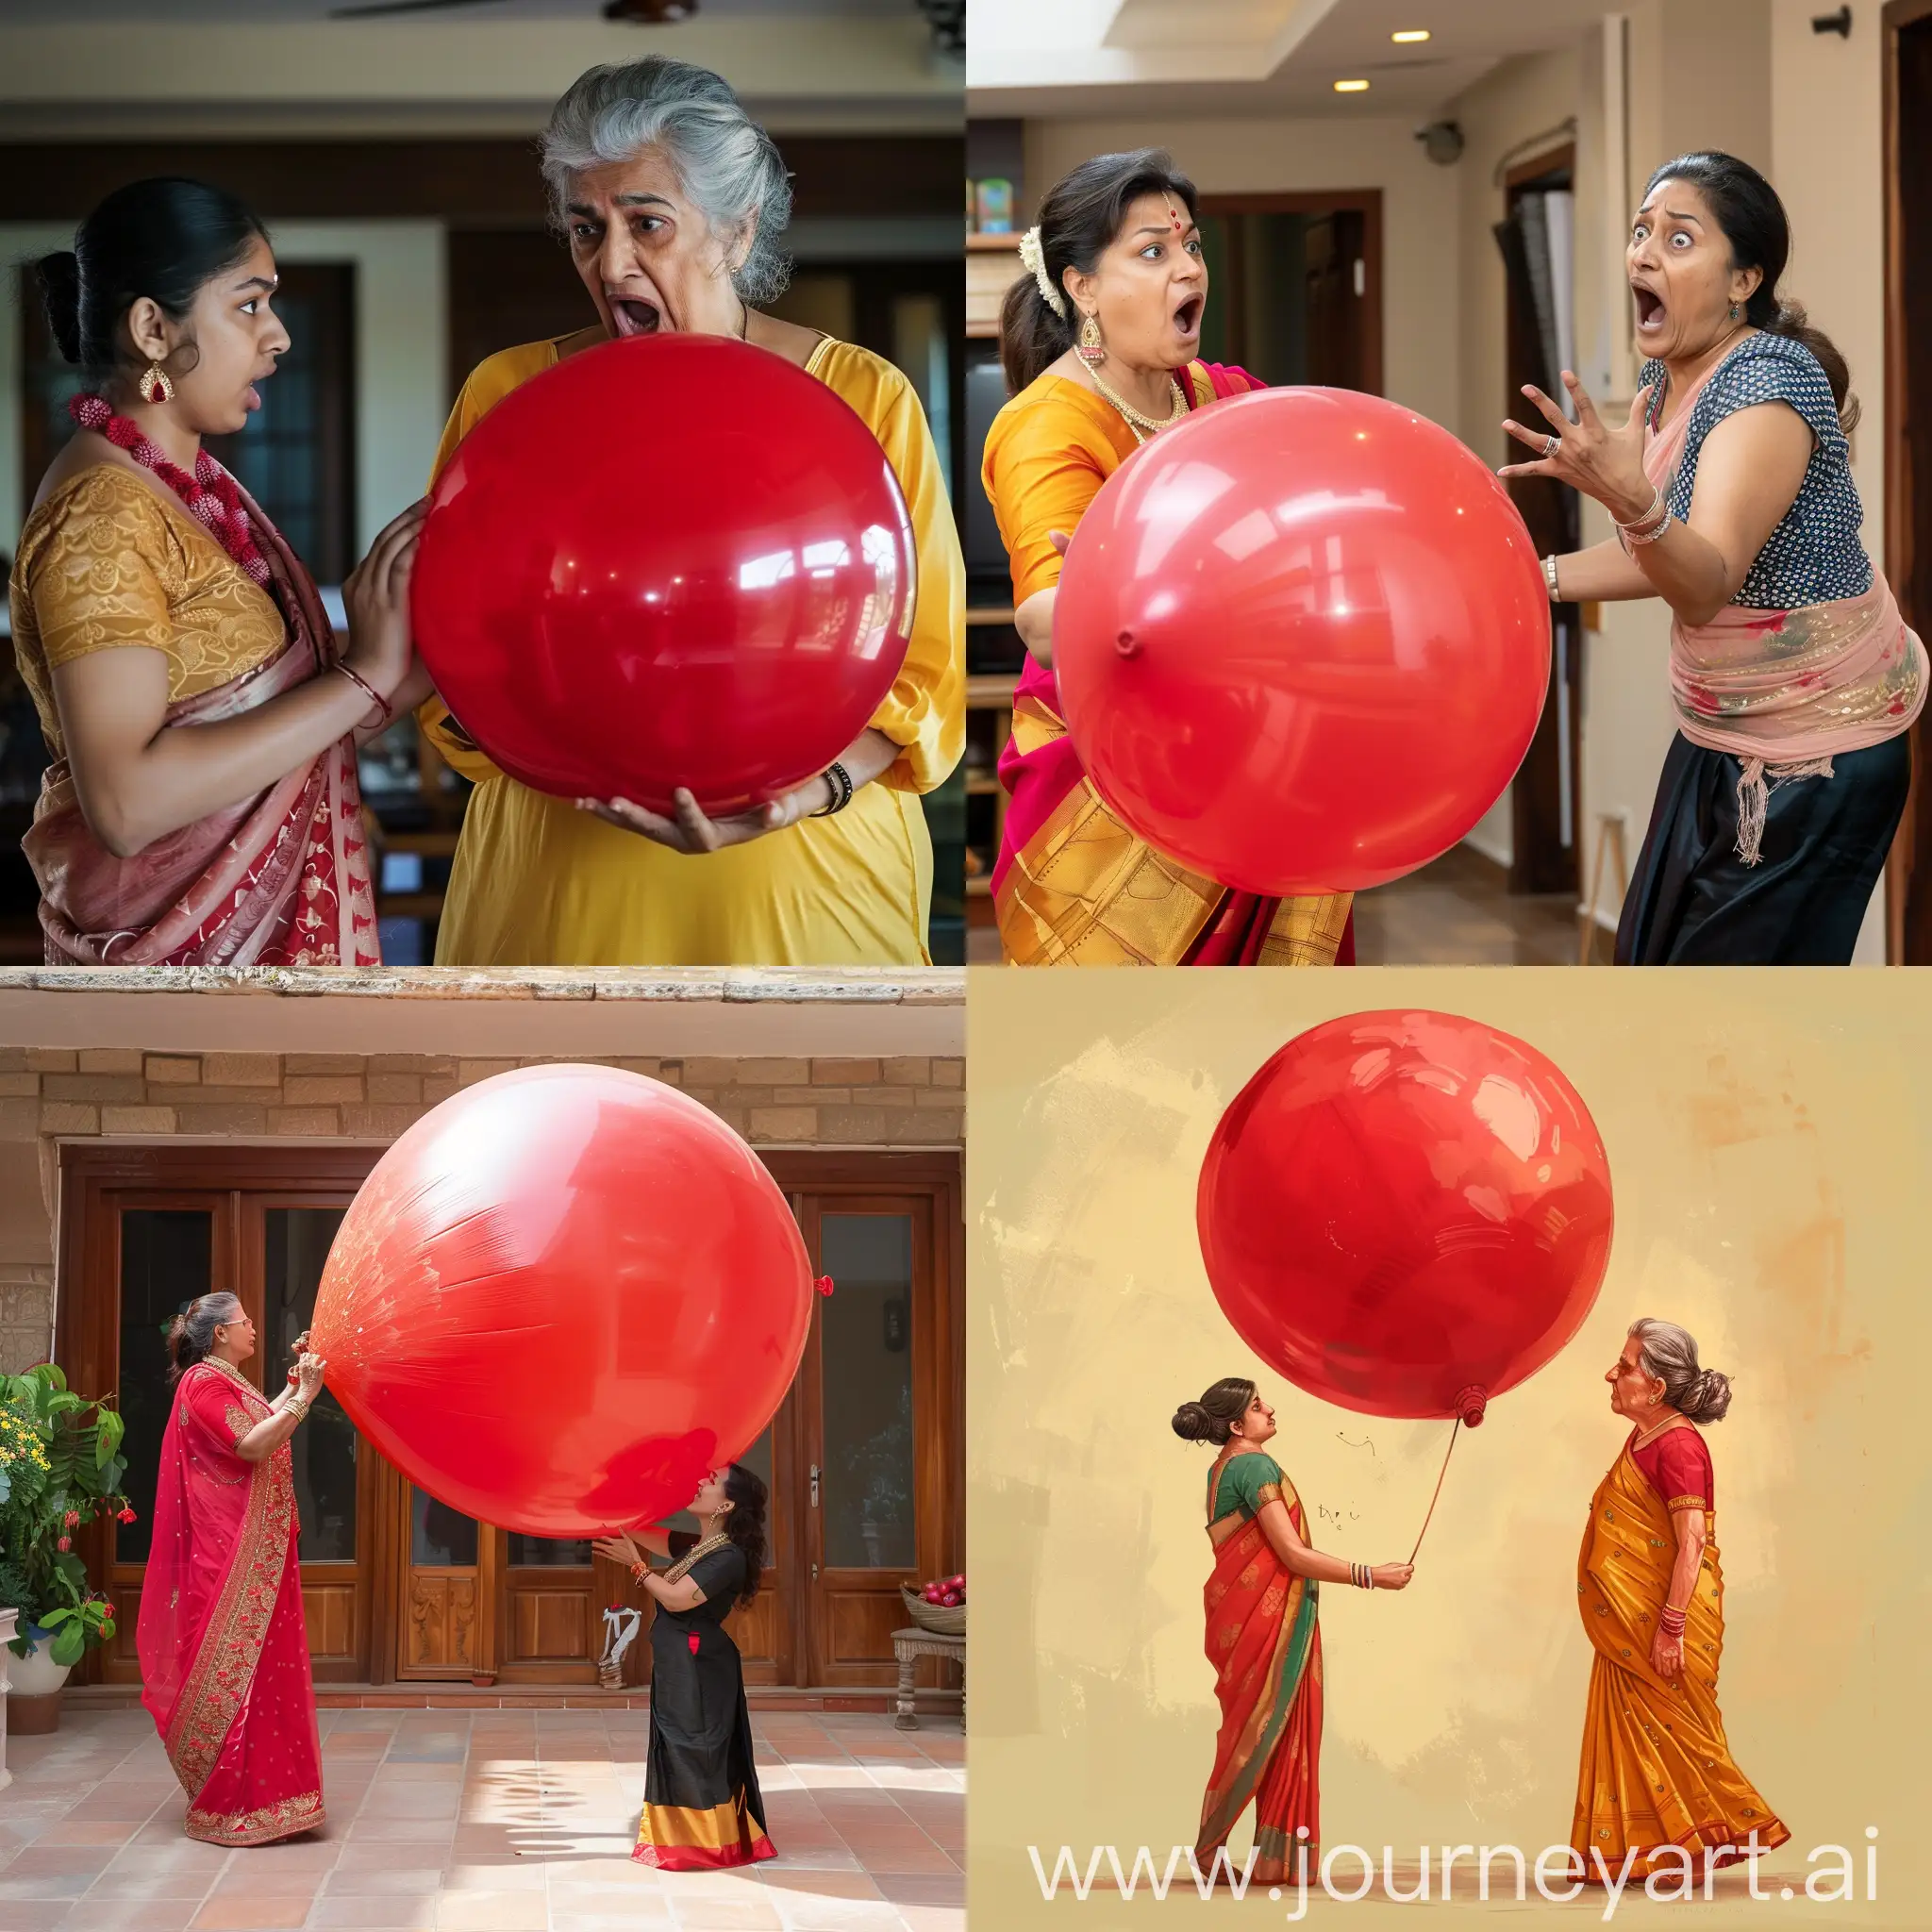 beautiful indian daughter in law in saree trying to burst a 36 inch overinflated tight round big red colour balloon due to her angry mother in law's orders 